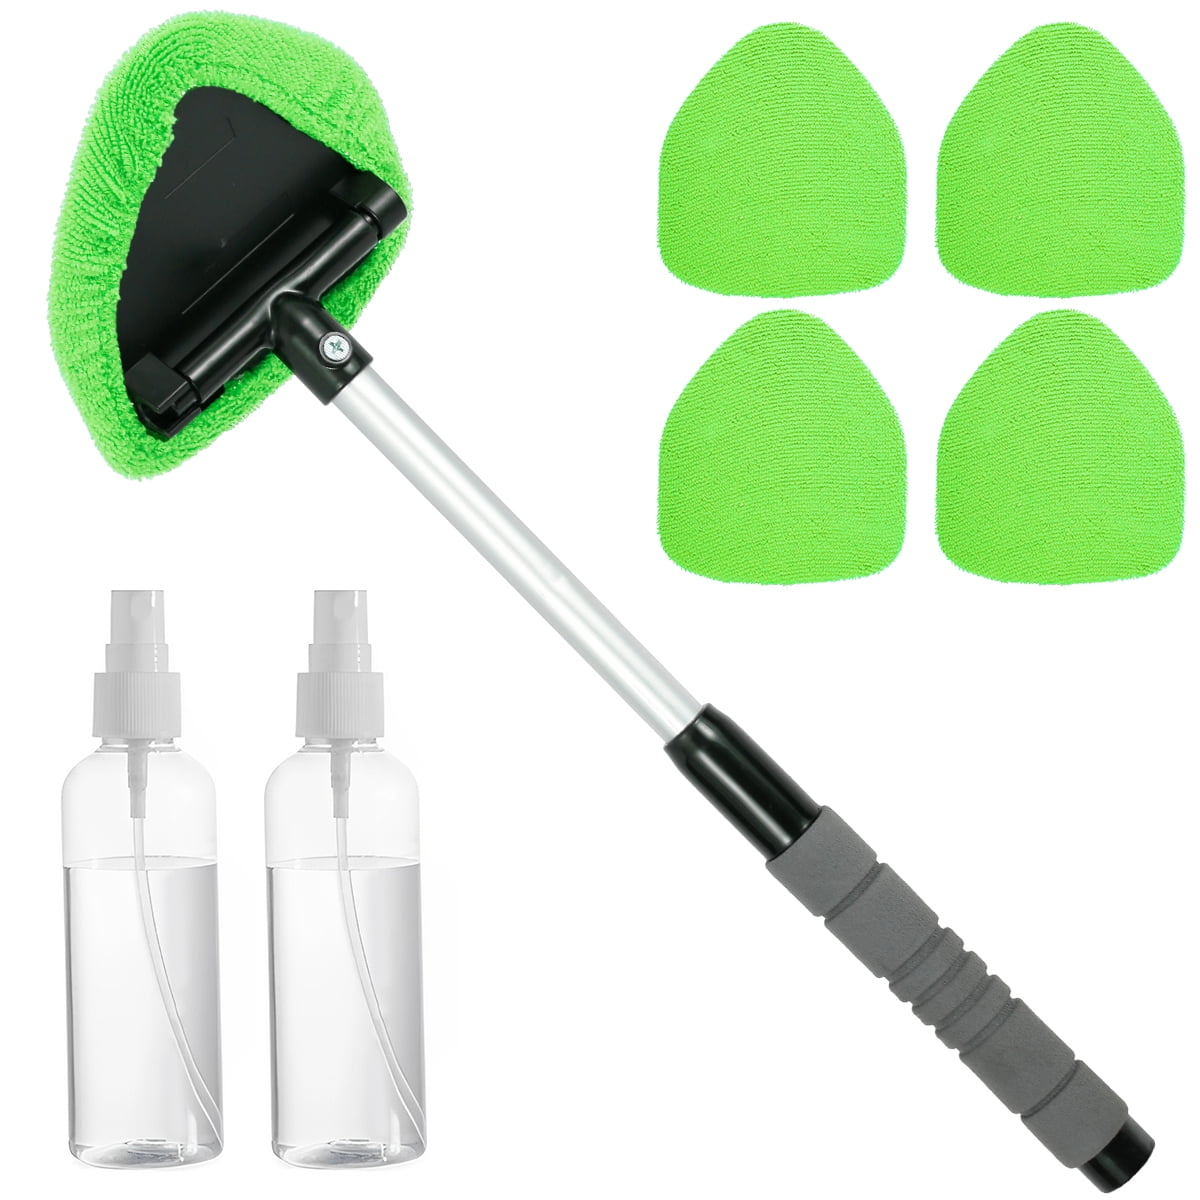  Beieverluck 3 Pieces Windshield Cleaner Tool Inside Car Window  Cleaning Tool with Extendable Handle, Microfiber Car Windshield Cleaner  with 9 Reusable Microfiber Pads and 3 Spray Bottles for Car Use : Automotive